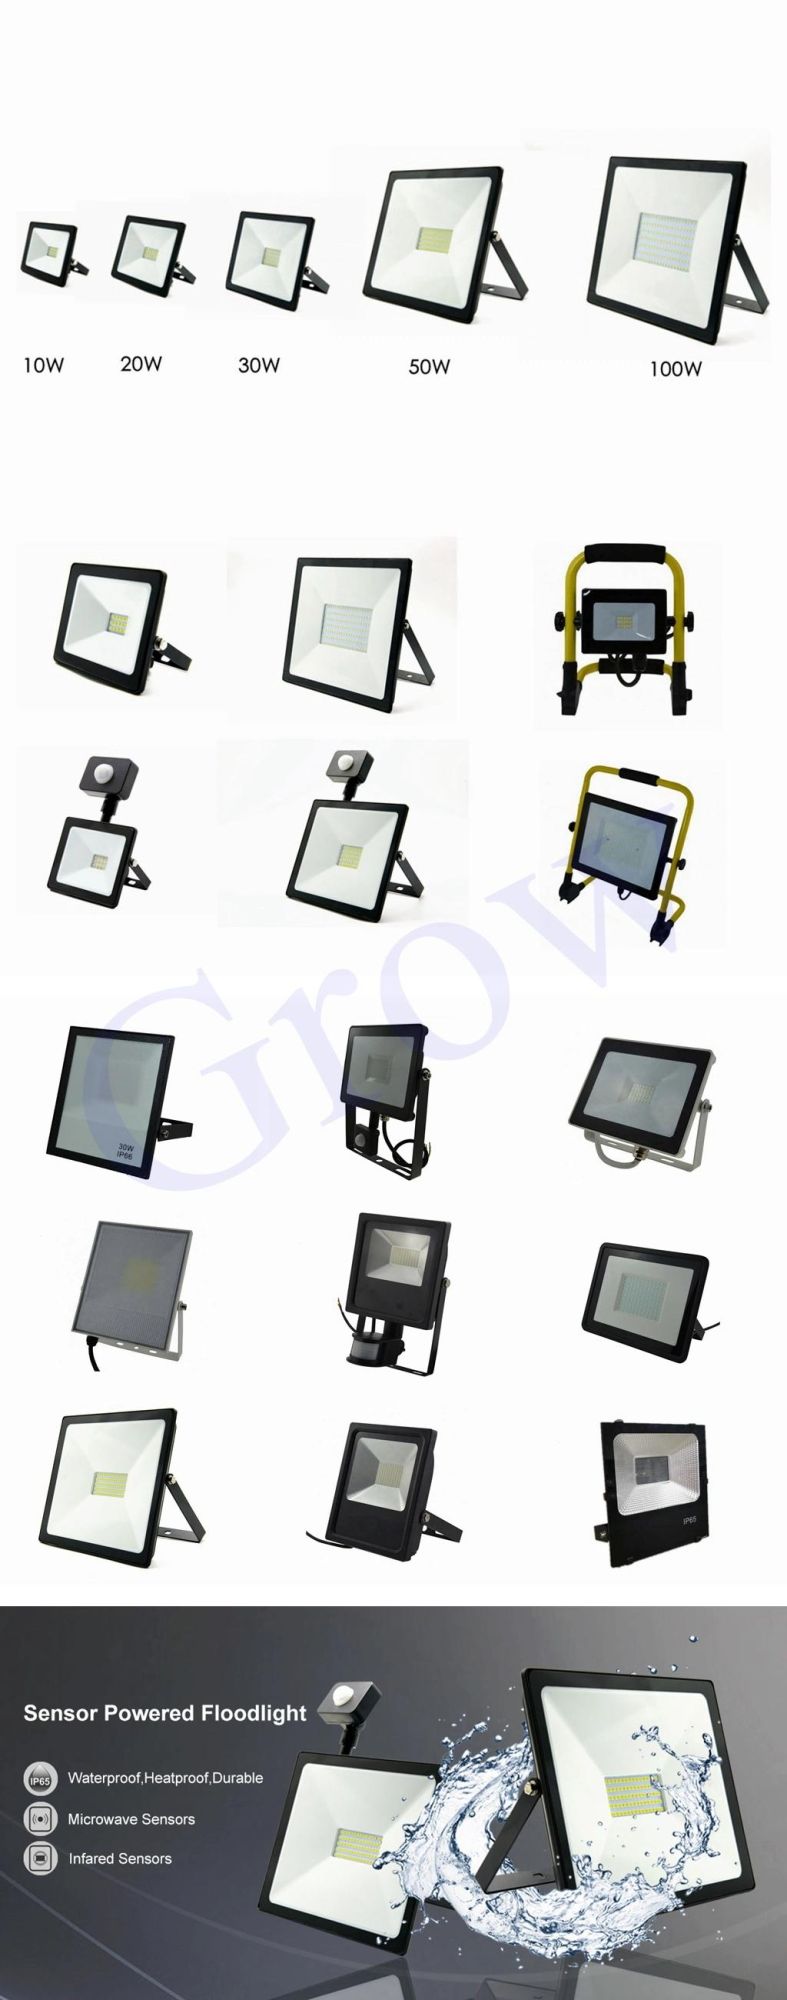 LED Flood Light 200W High Power LED Floodlight for Outdoor Lighting IP65 Waterproof with CE RoHS Certified